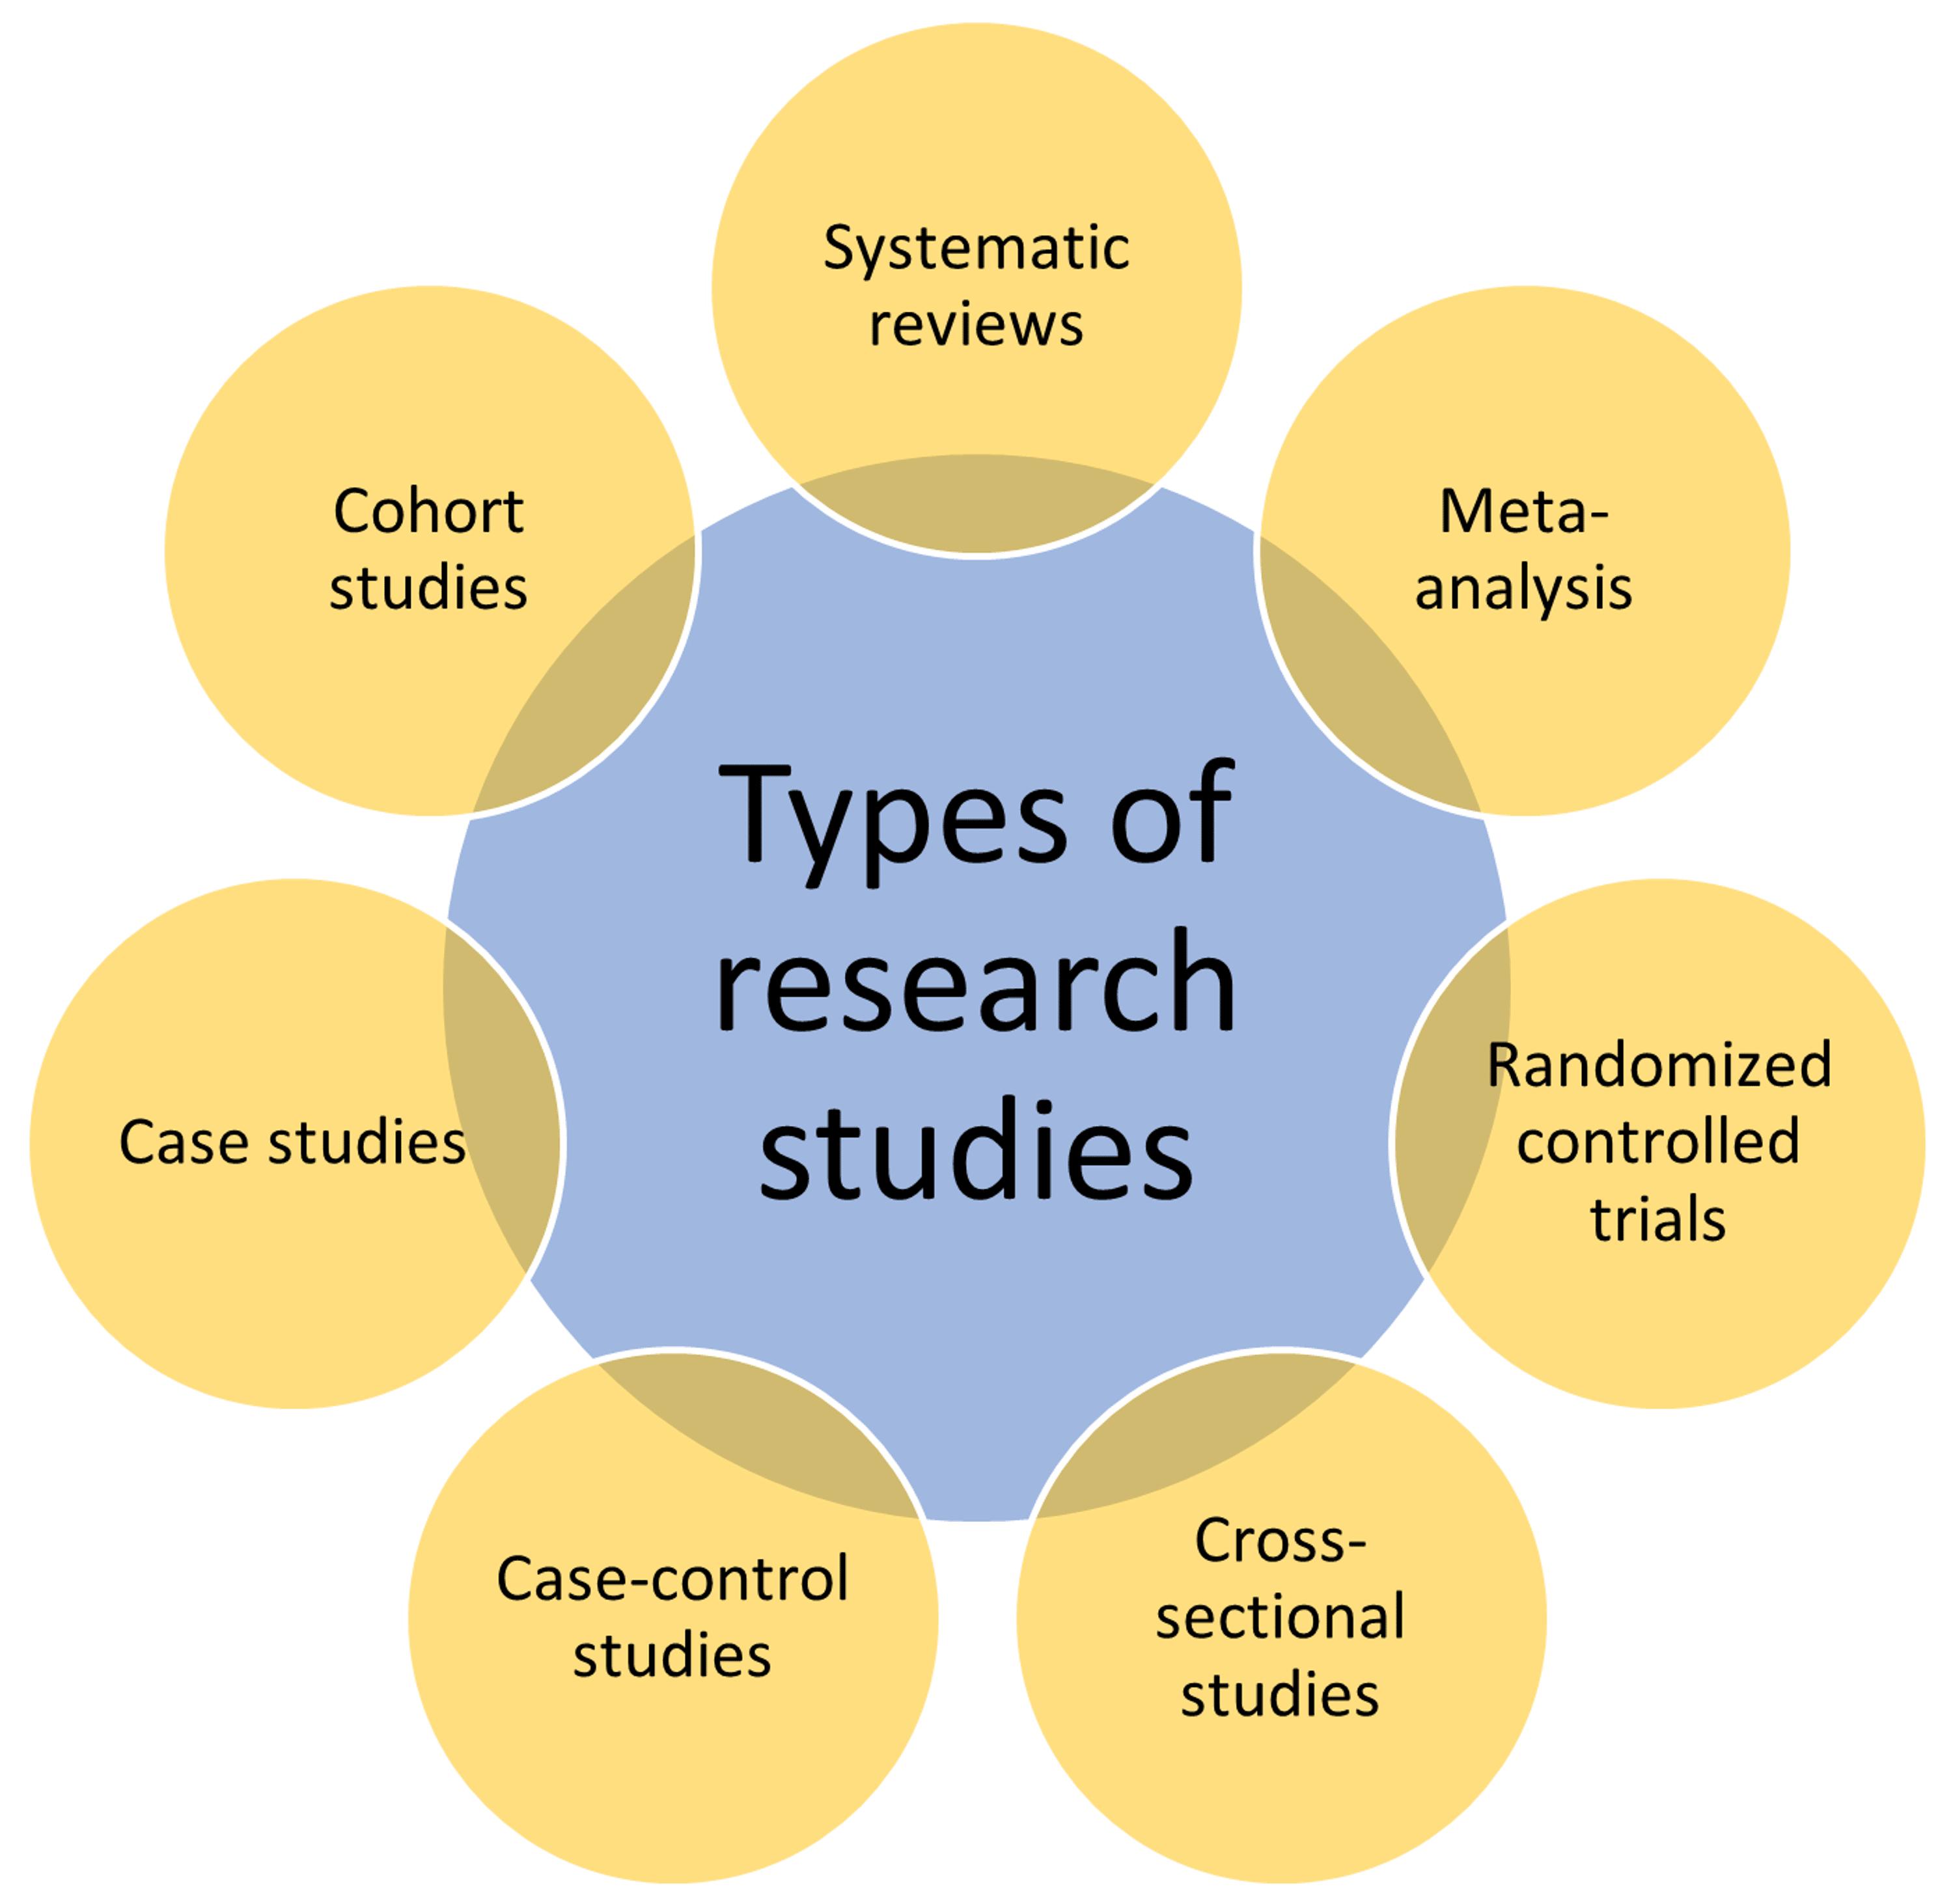 research studies is